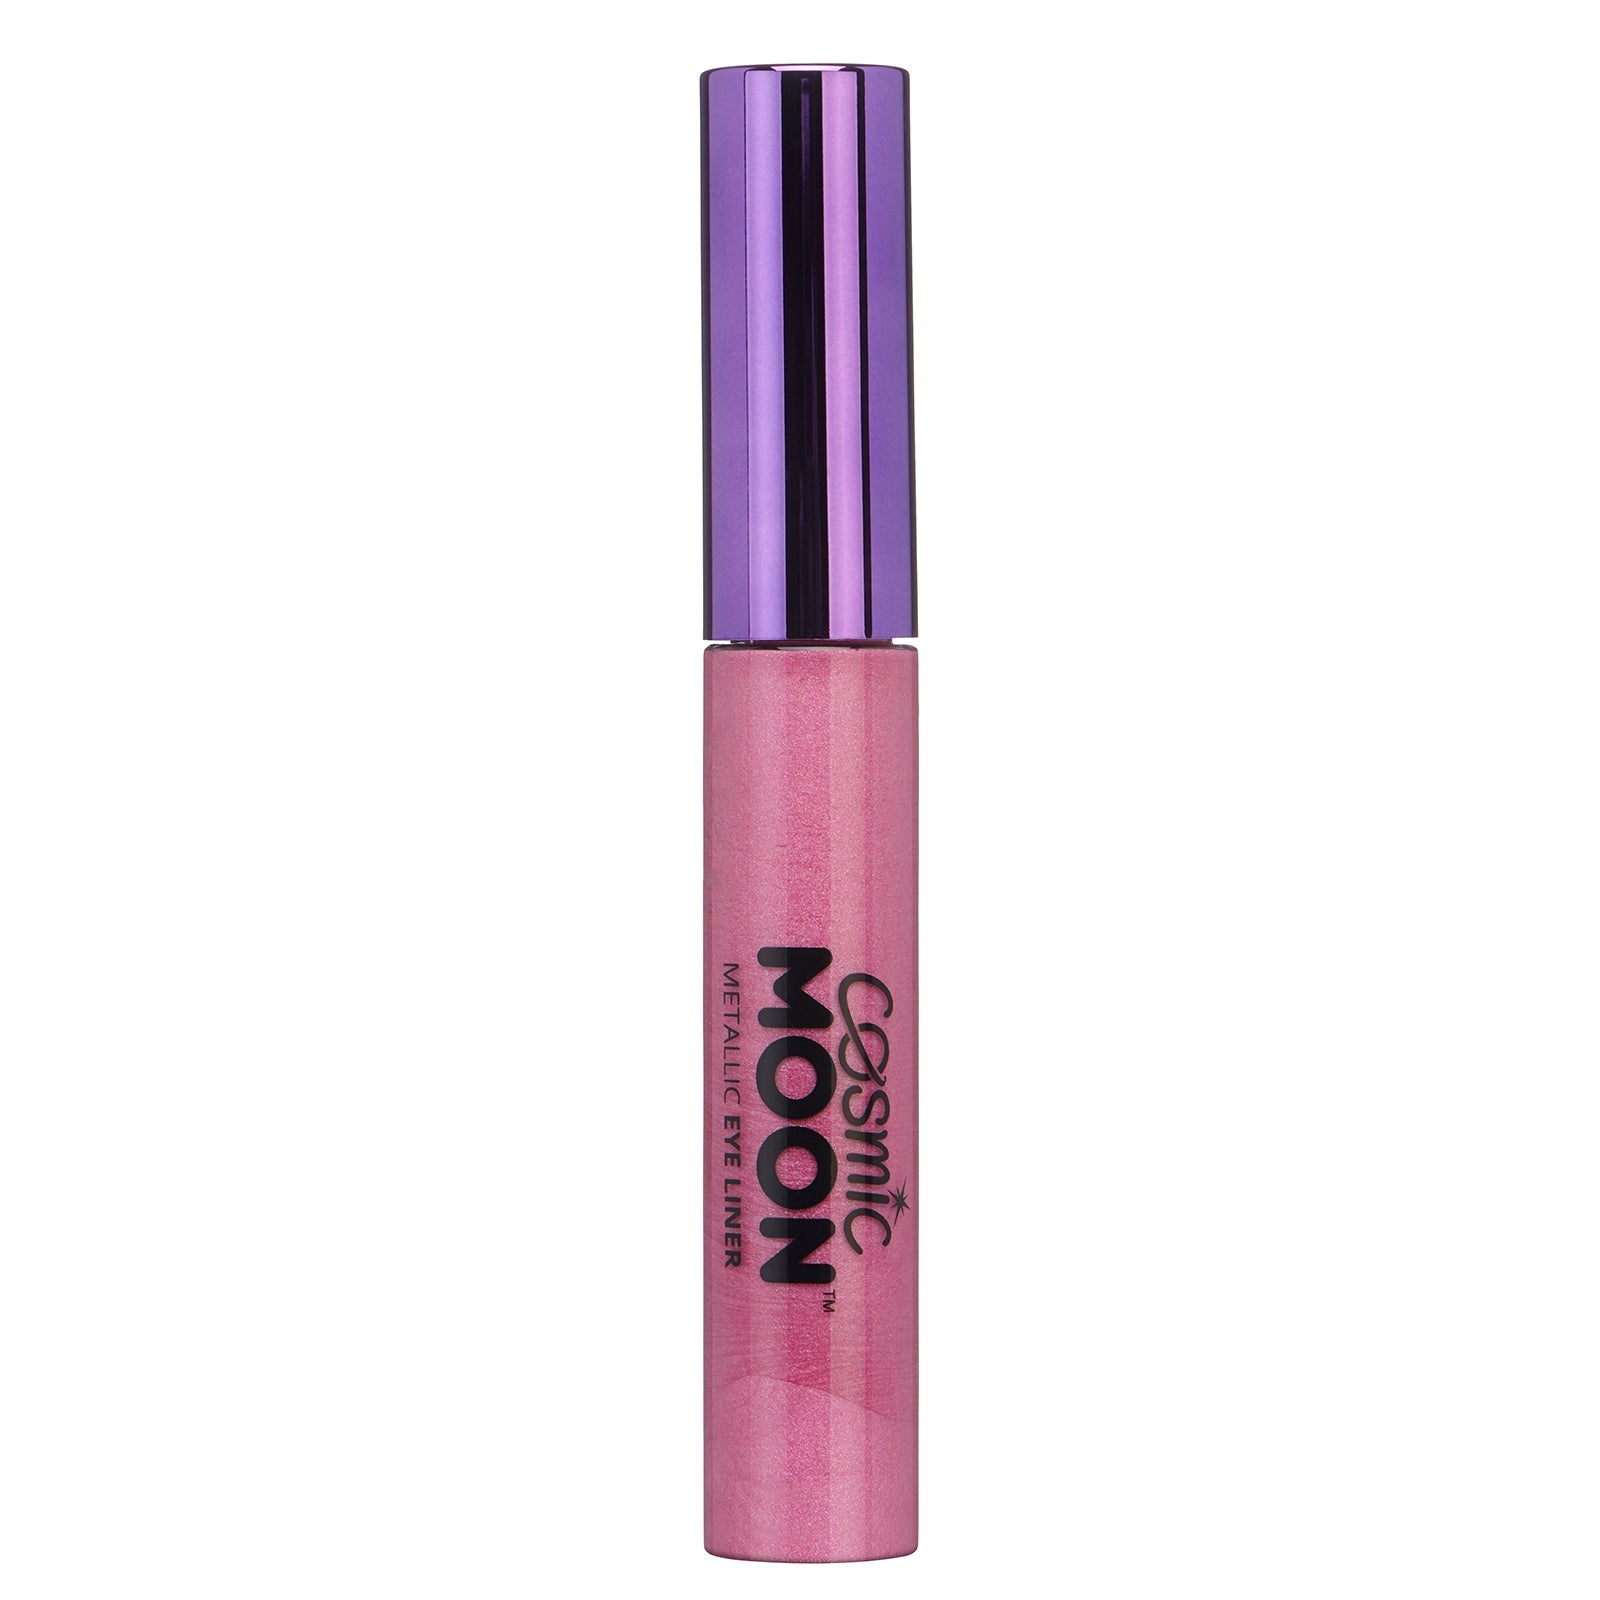 Pink - Metallic Eyeliner, 10mL. Cosmetically certified, FDA & Health Canada compliant and cruelty free.